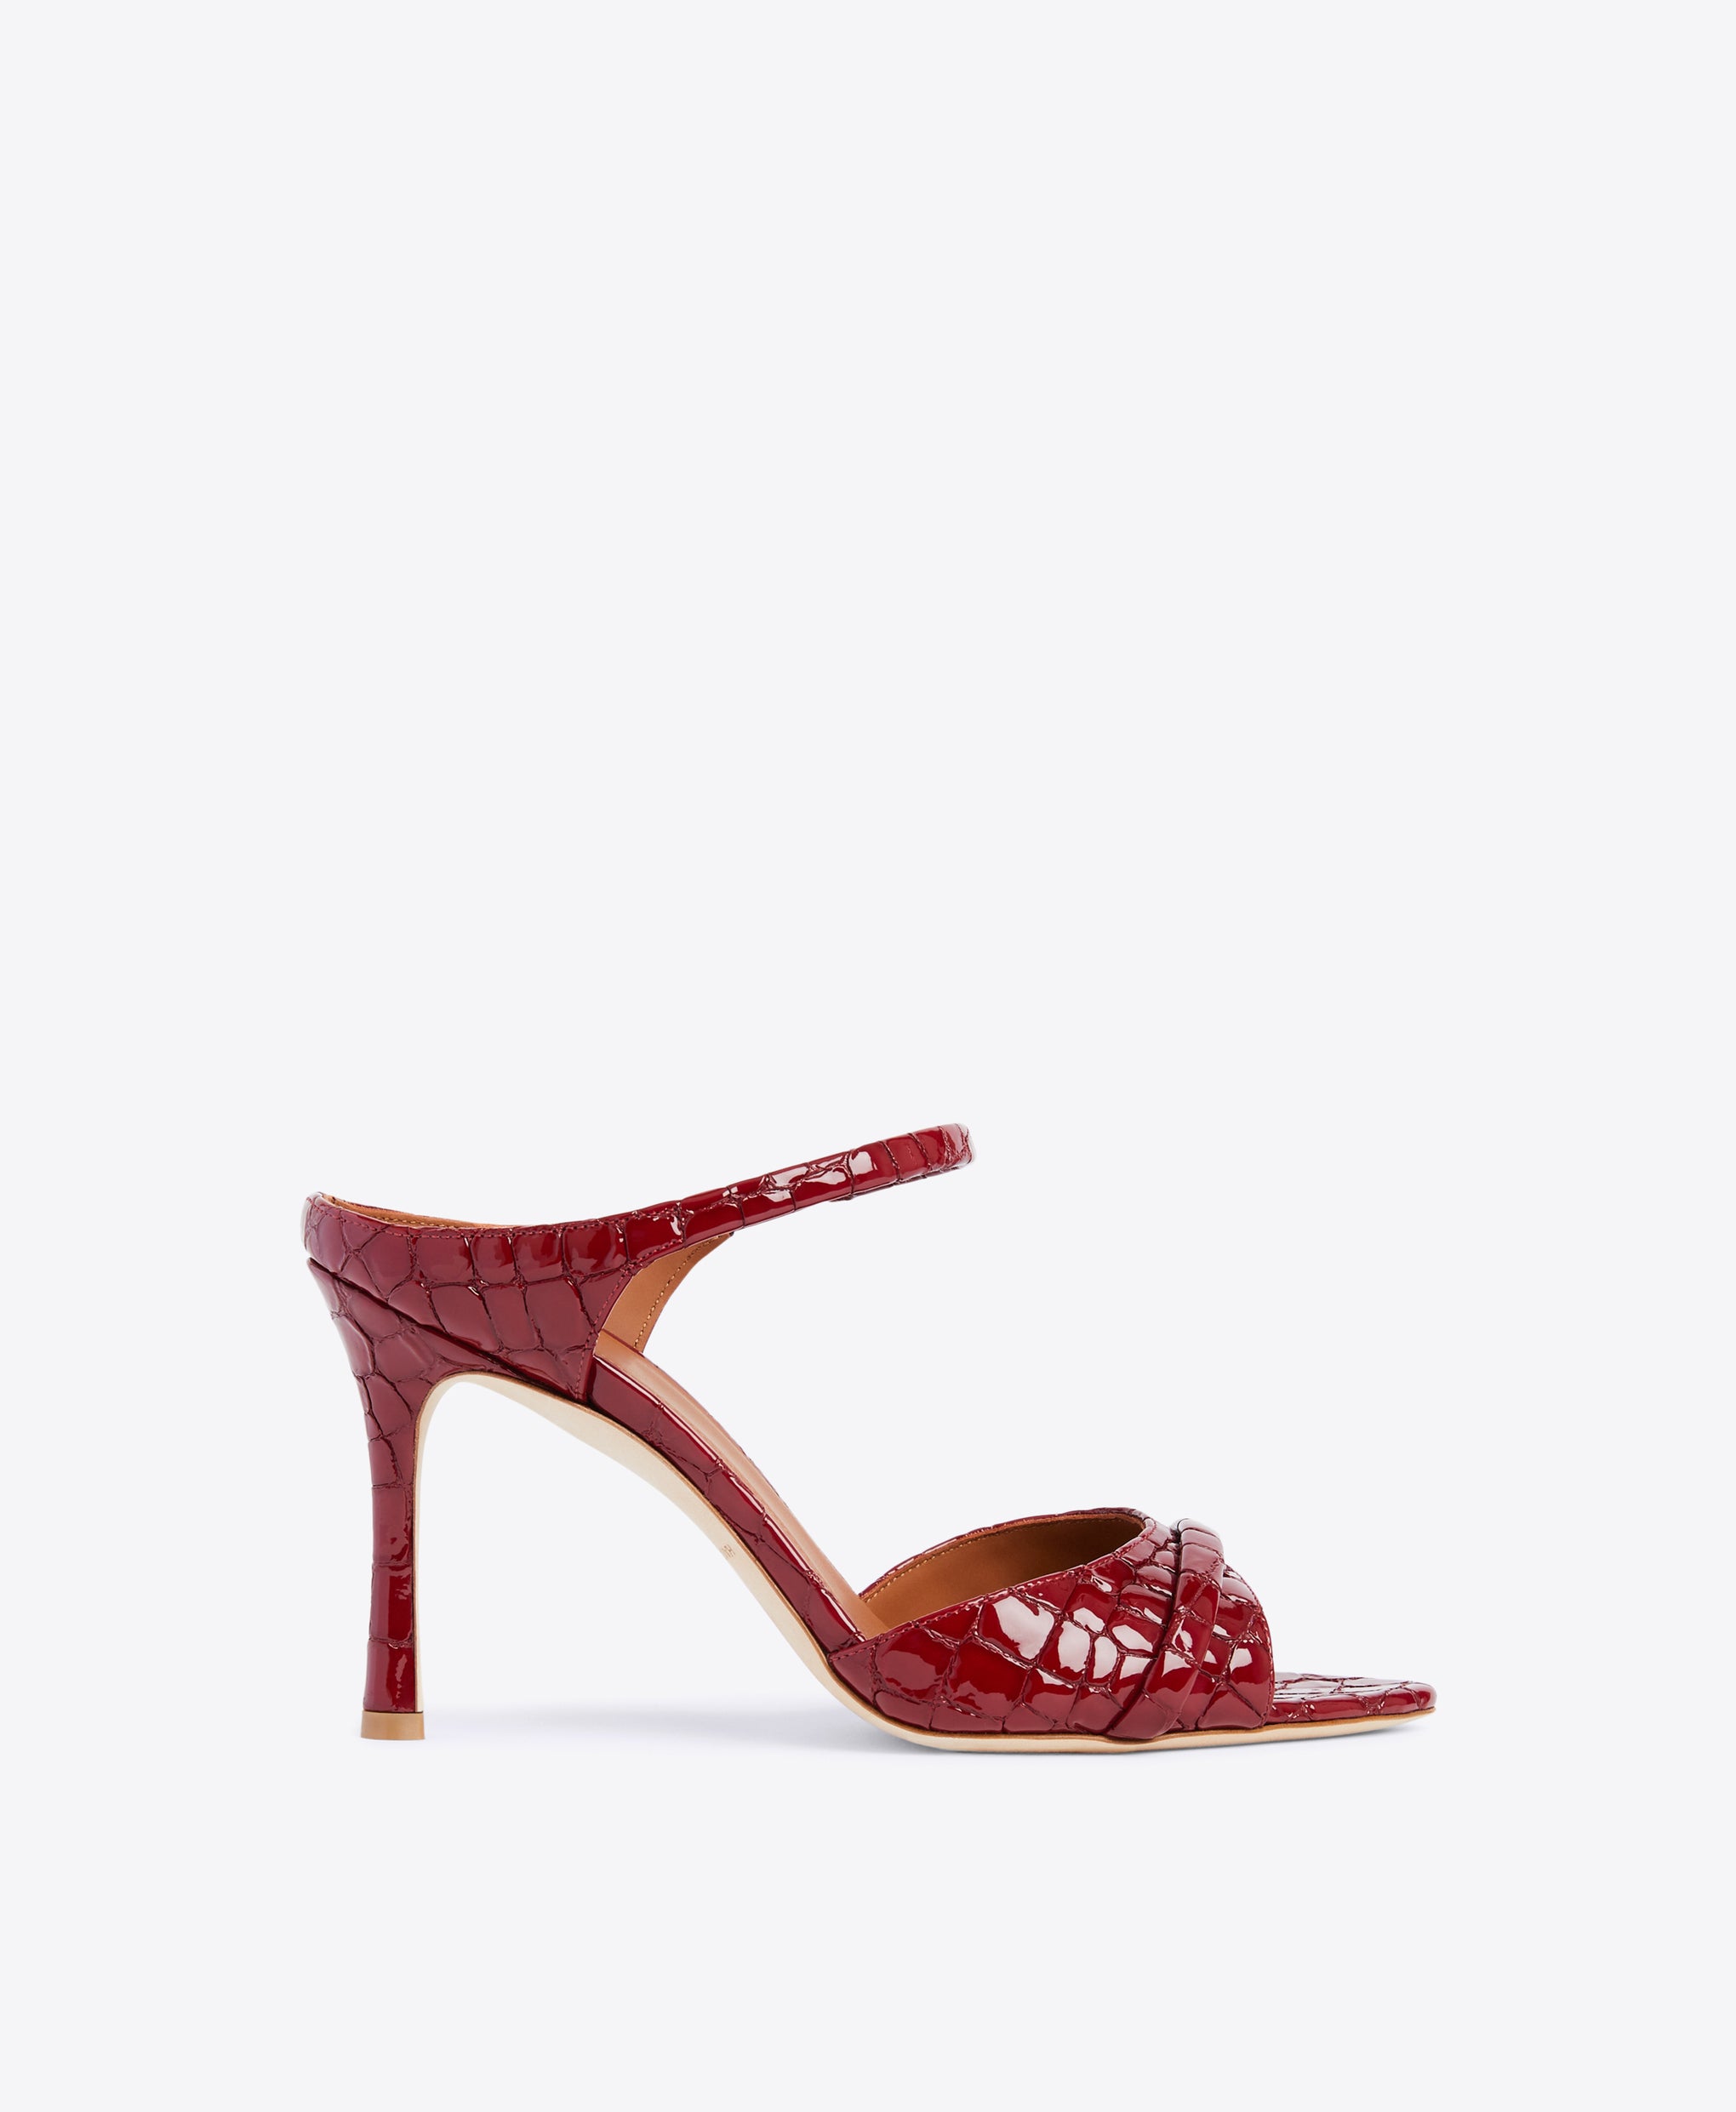 Two-Part Burgundy Sandals - Strap on Flared Stiletto | Malone Souliers